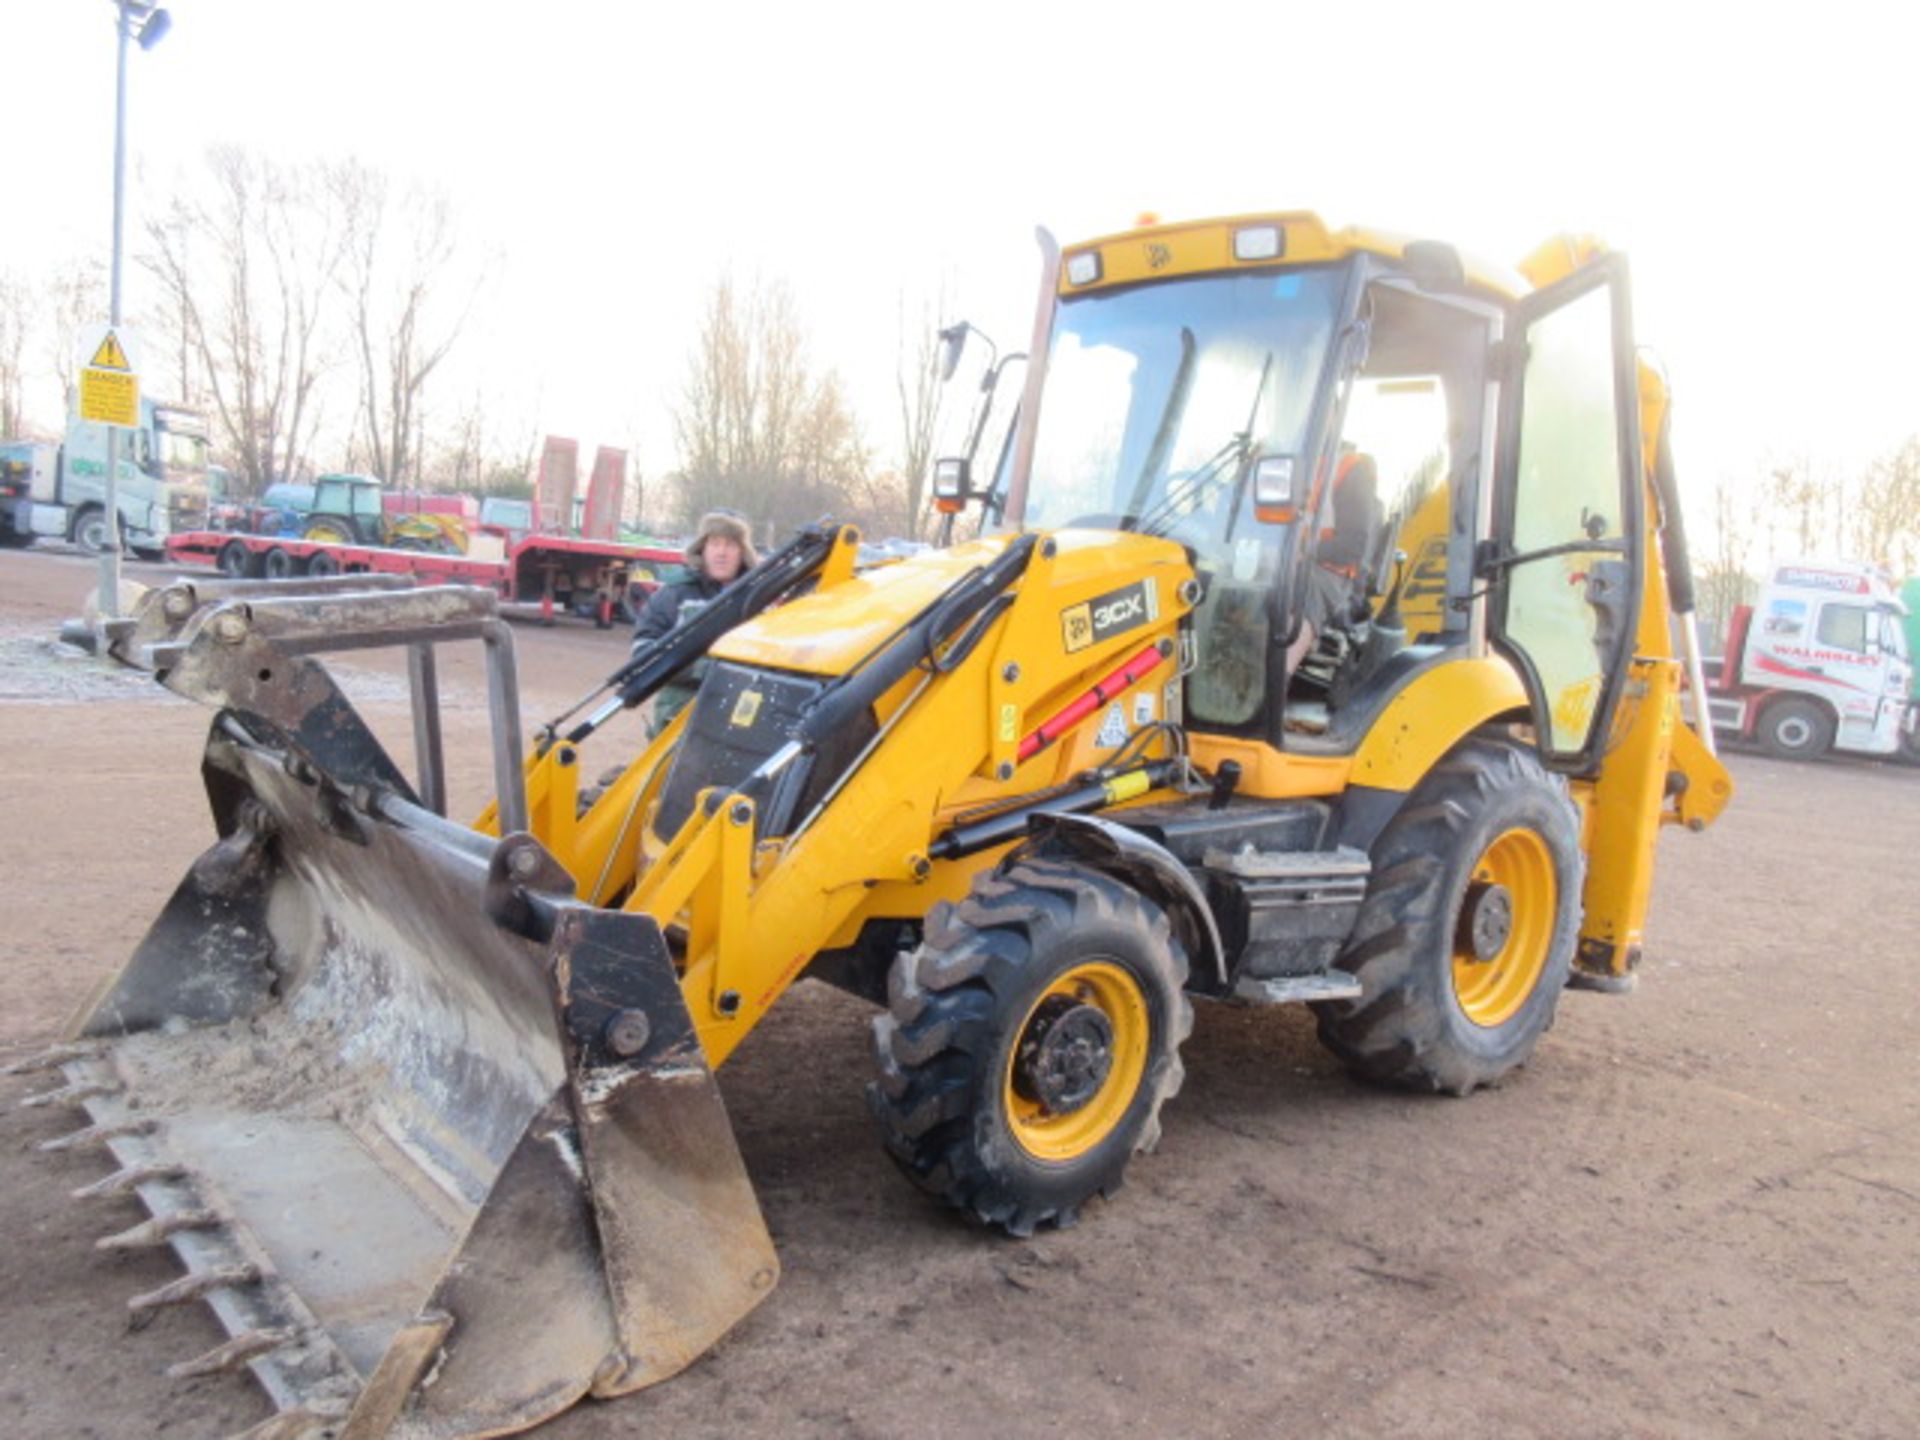 2008 JCB 3CX Sitemaster c/w Piped, Quick Hitch, 4 in 1 Bucket Ser. No. 81346092